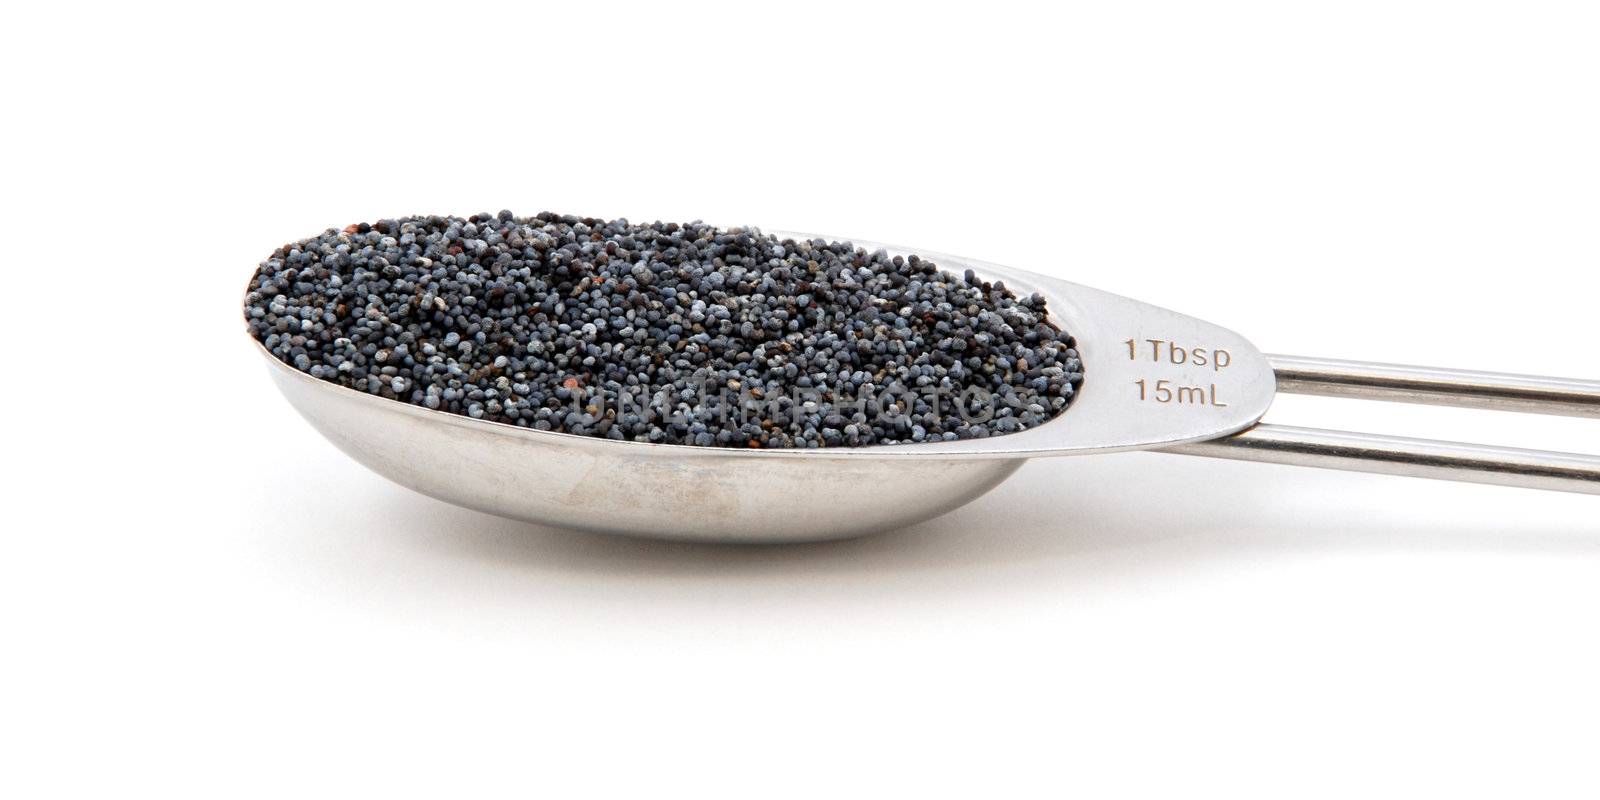 Poppy seeds measured in a metal tablespoon by sarahdoow